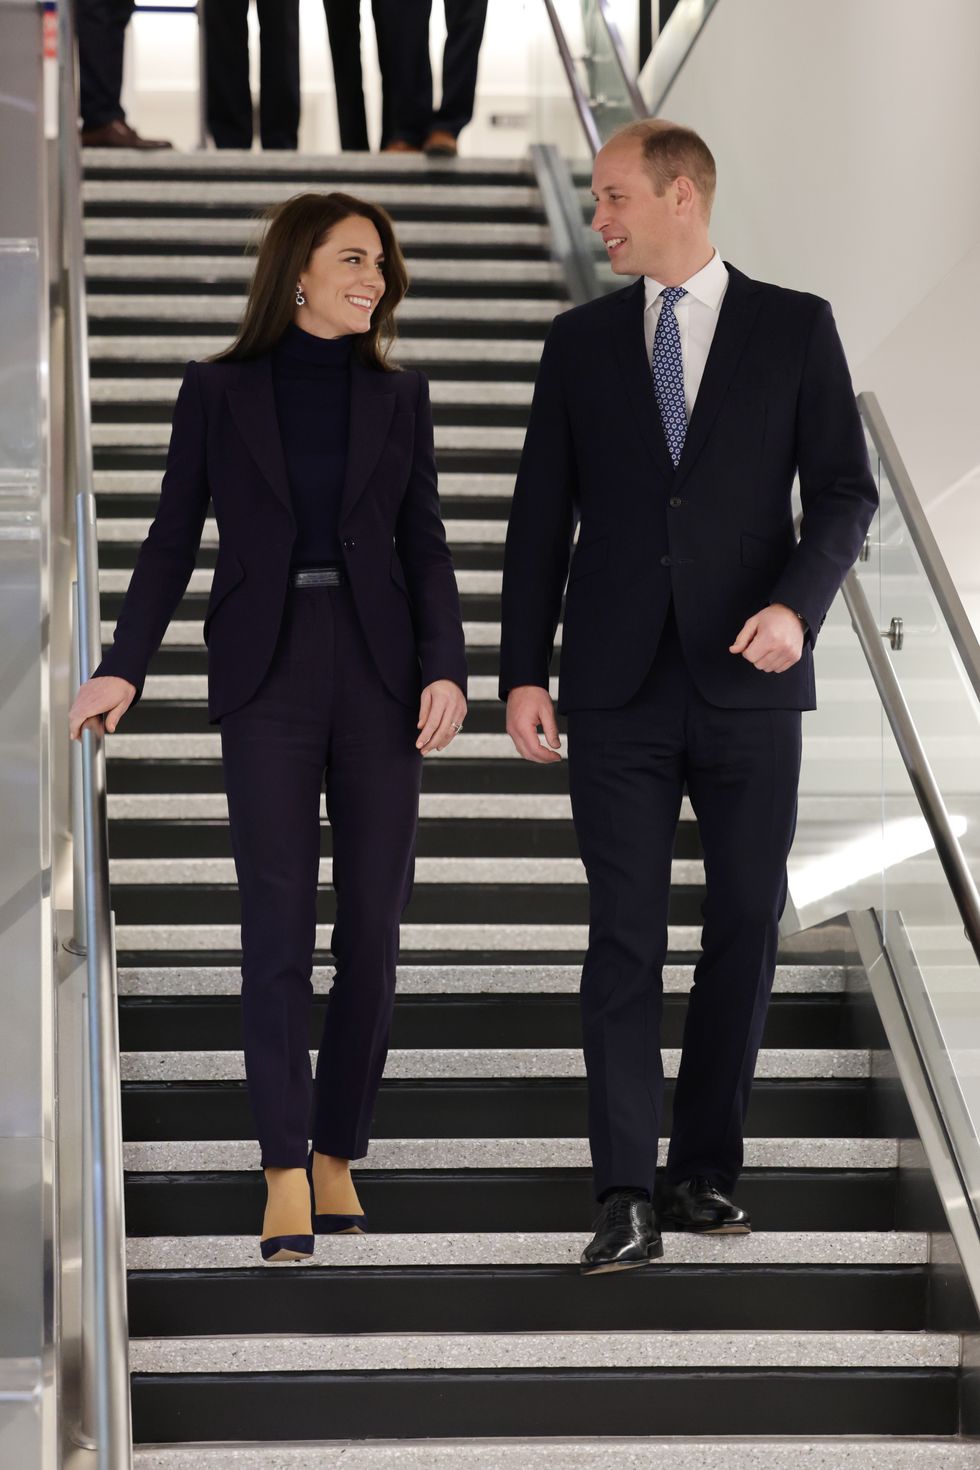 Kate Middleton Looks So Chic in $25 Pants From the Gap!: Photo 3747983, Kate Middleton, Prince William Photos